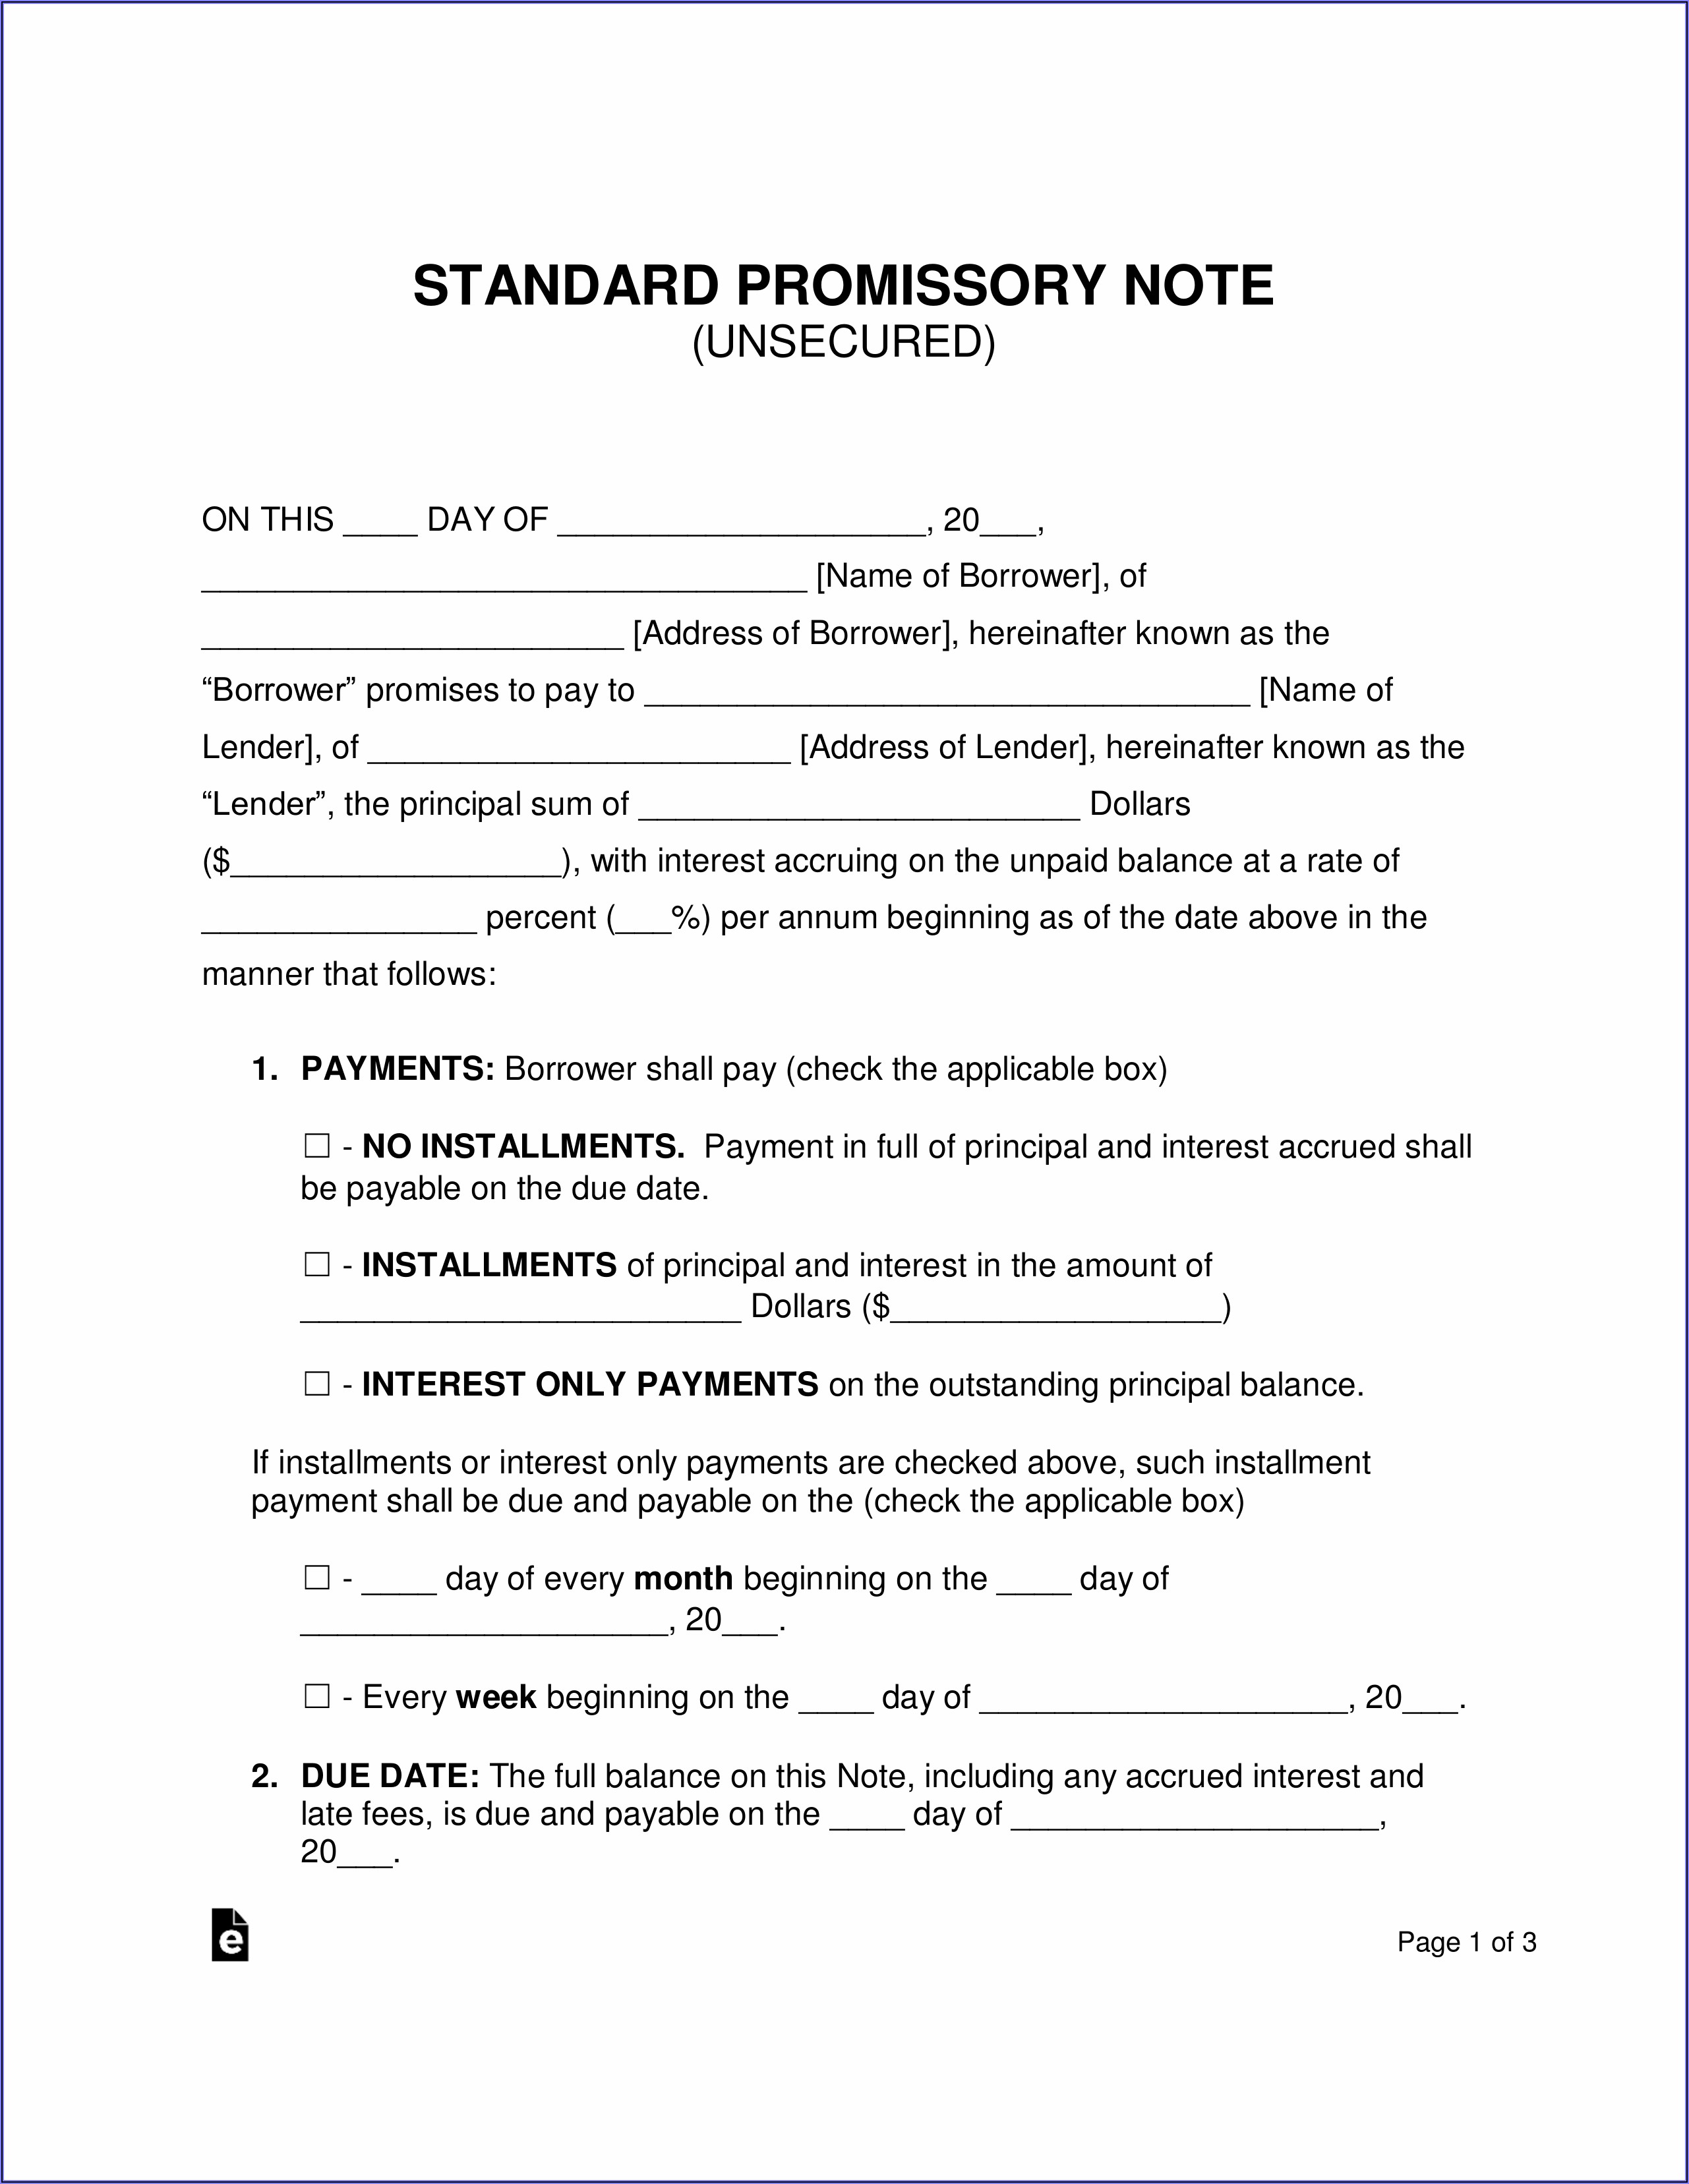 Promissory Note Legal Notice Format